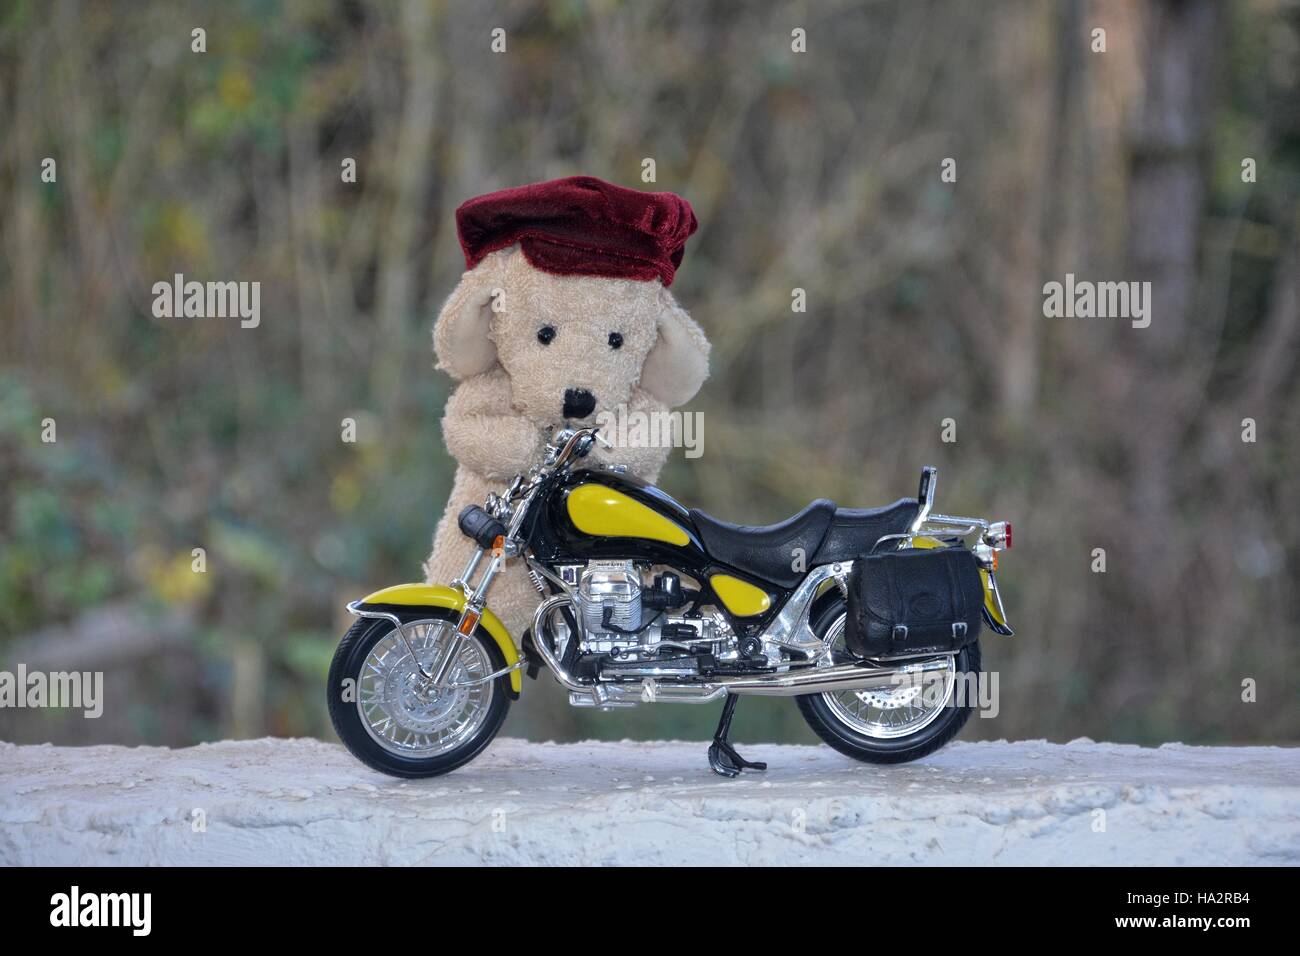 Dog soft toy with cap stands behind a motorcycle outside Stock Photo